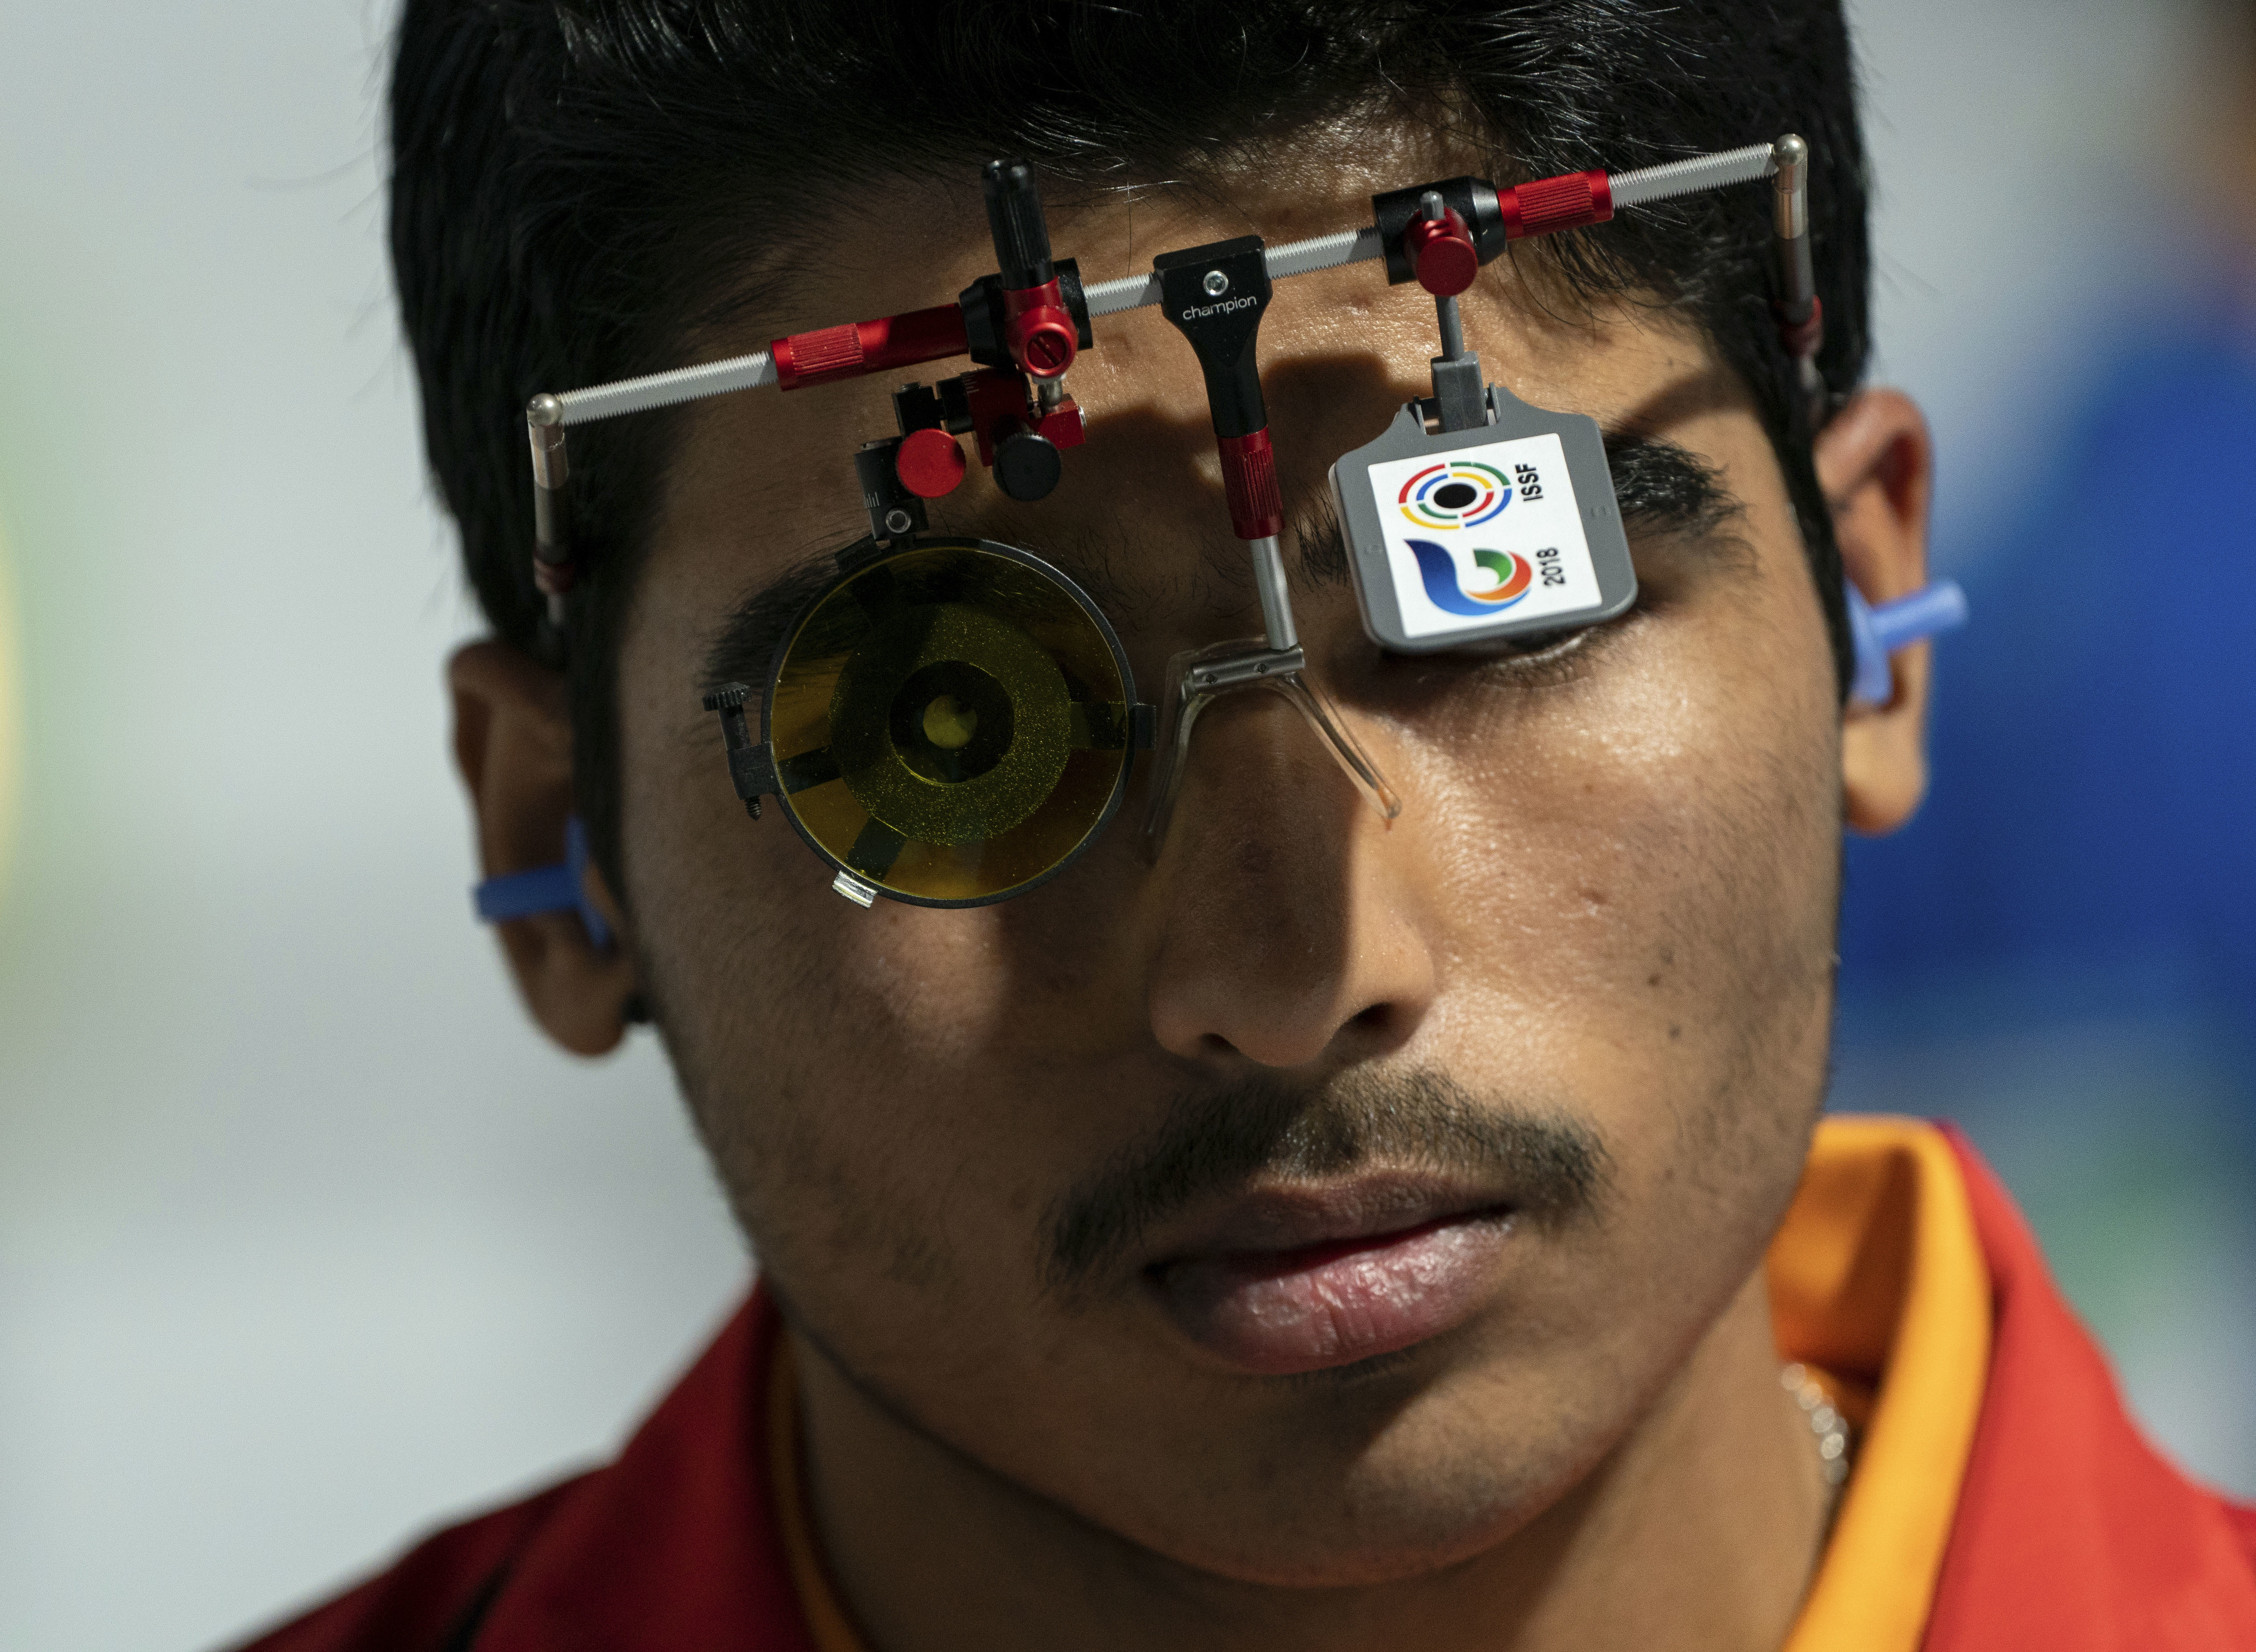 Chaudhary Saurabh from India, looks on during the shooting men's 10m air pistol final at the shooting range at Tecnopolis Park during the Youth Olympic Games in Buenos Aires, Argentina - AP